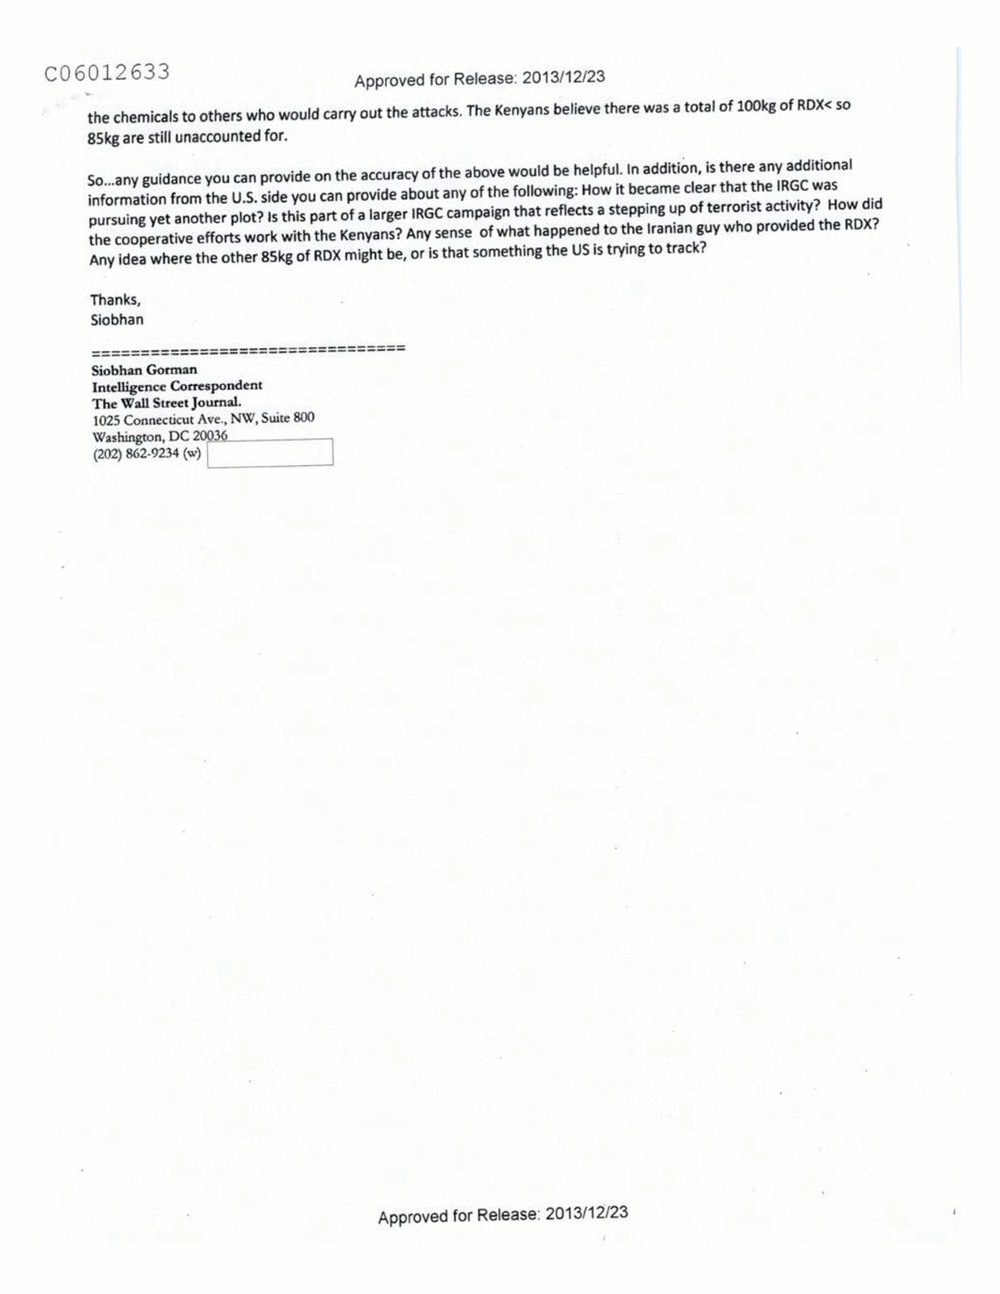 Page 194 from Email Correspondence Between Reporters and CIA Flacks